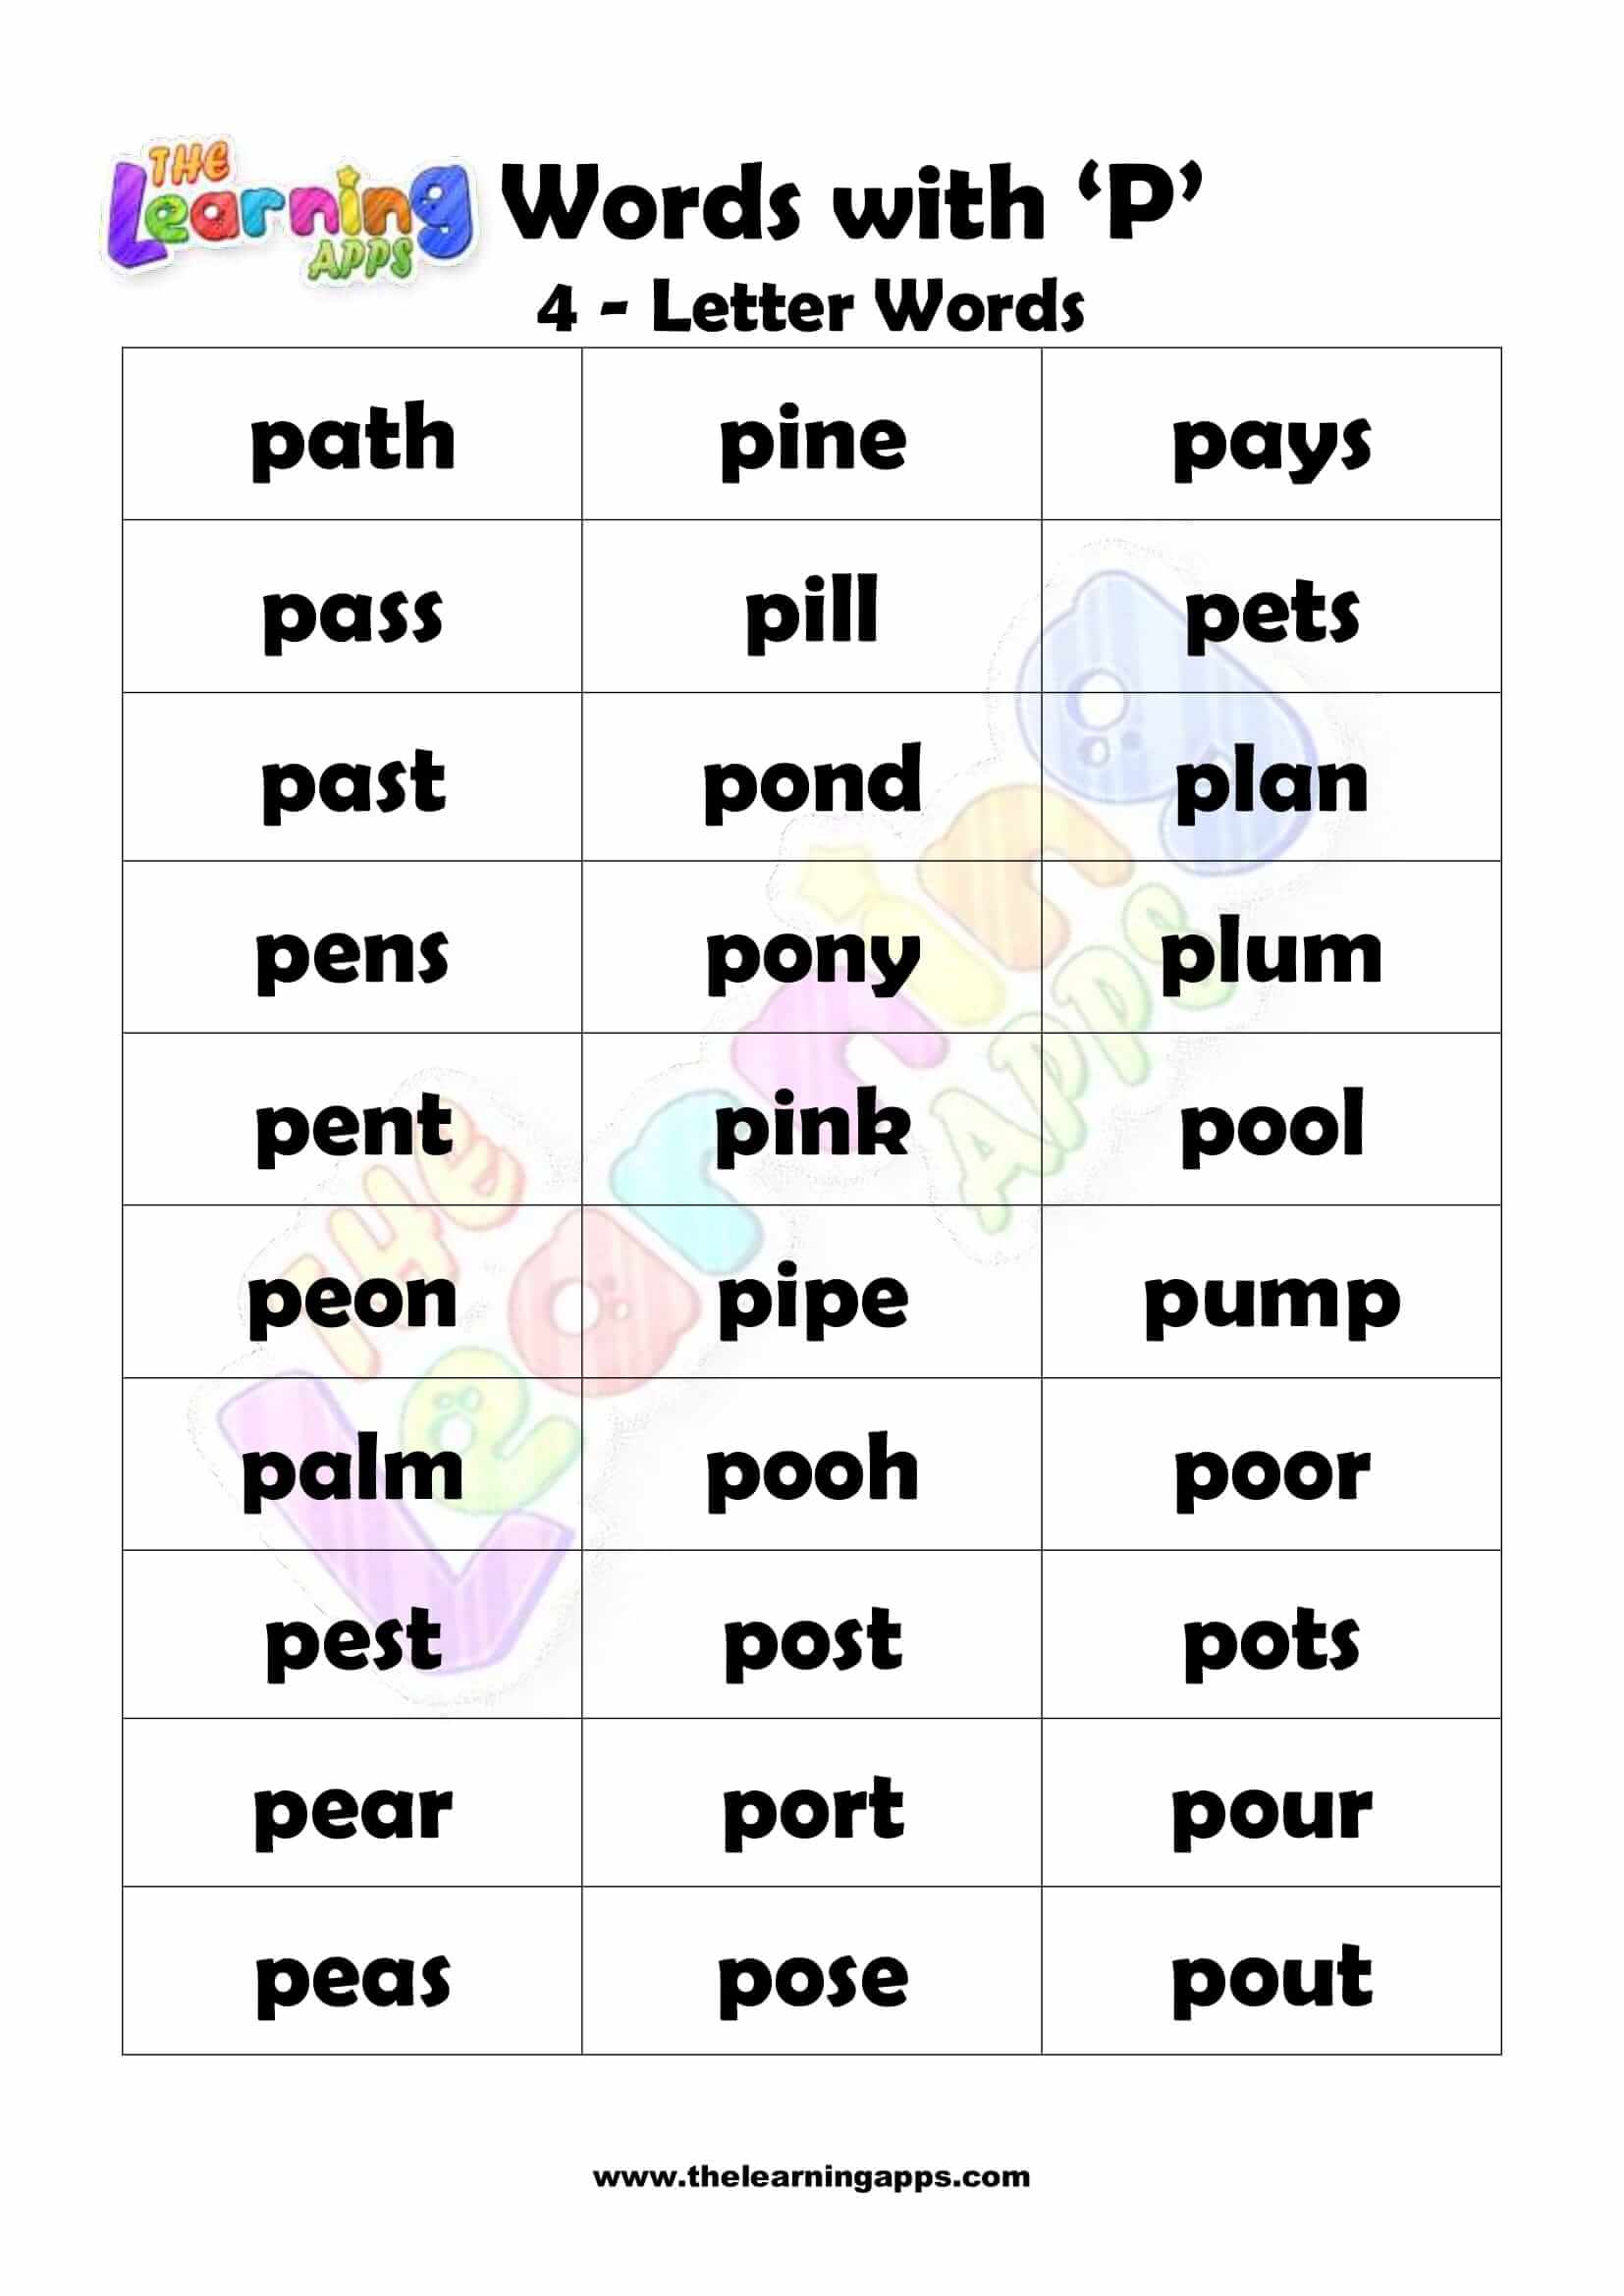 4 LETTER WORD STARTING WITH P-2